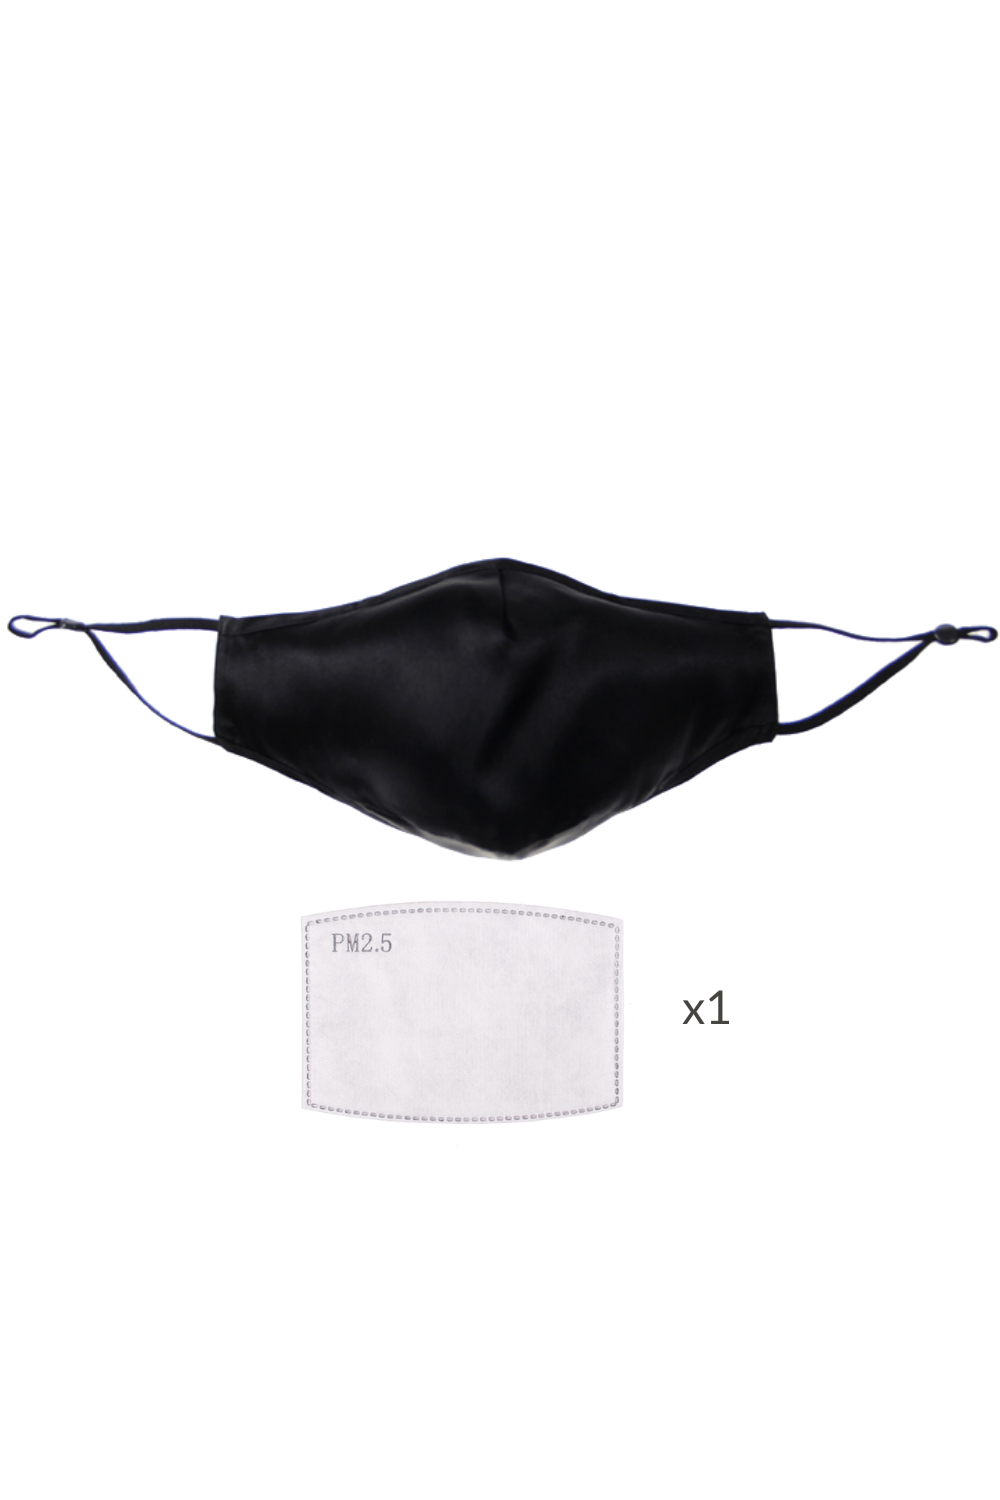 ULTRA Silk Face Mask - Black (with Filter Pocket and Nose Wire) - BASK™